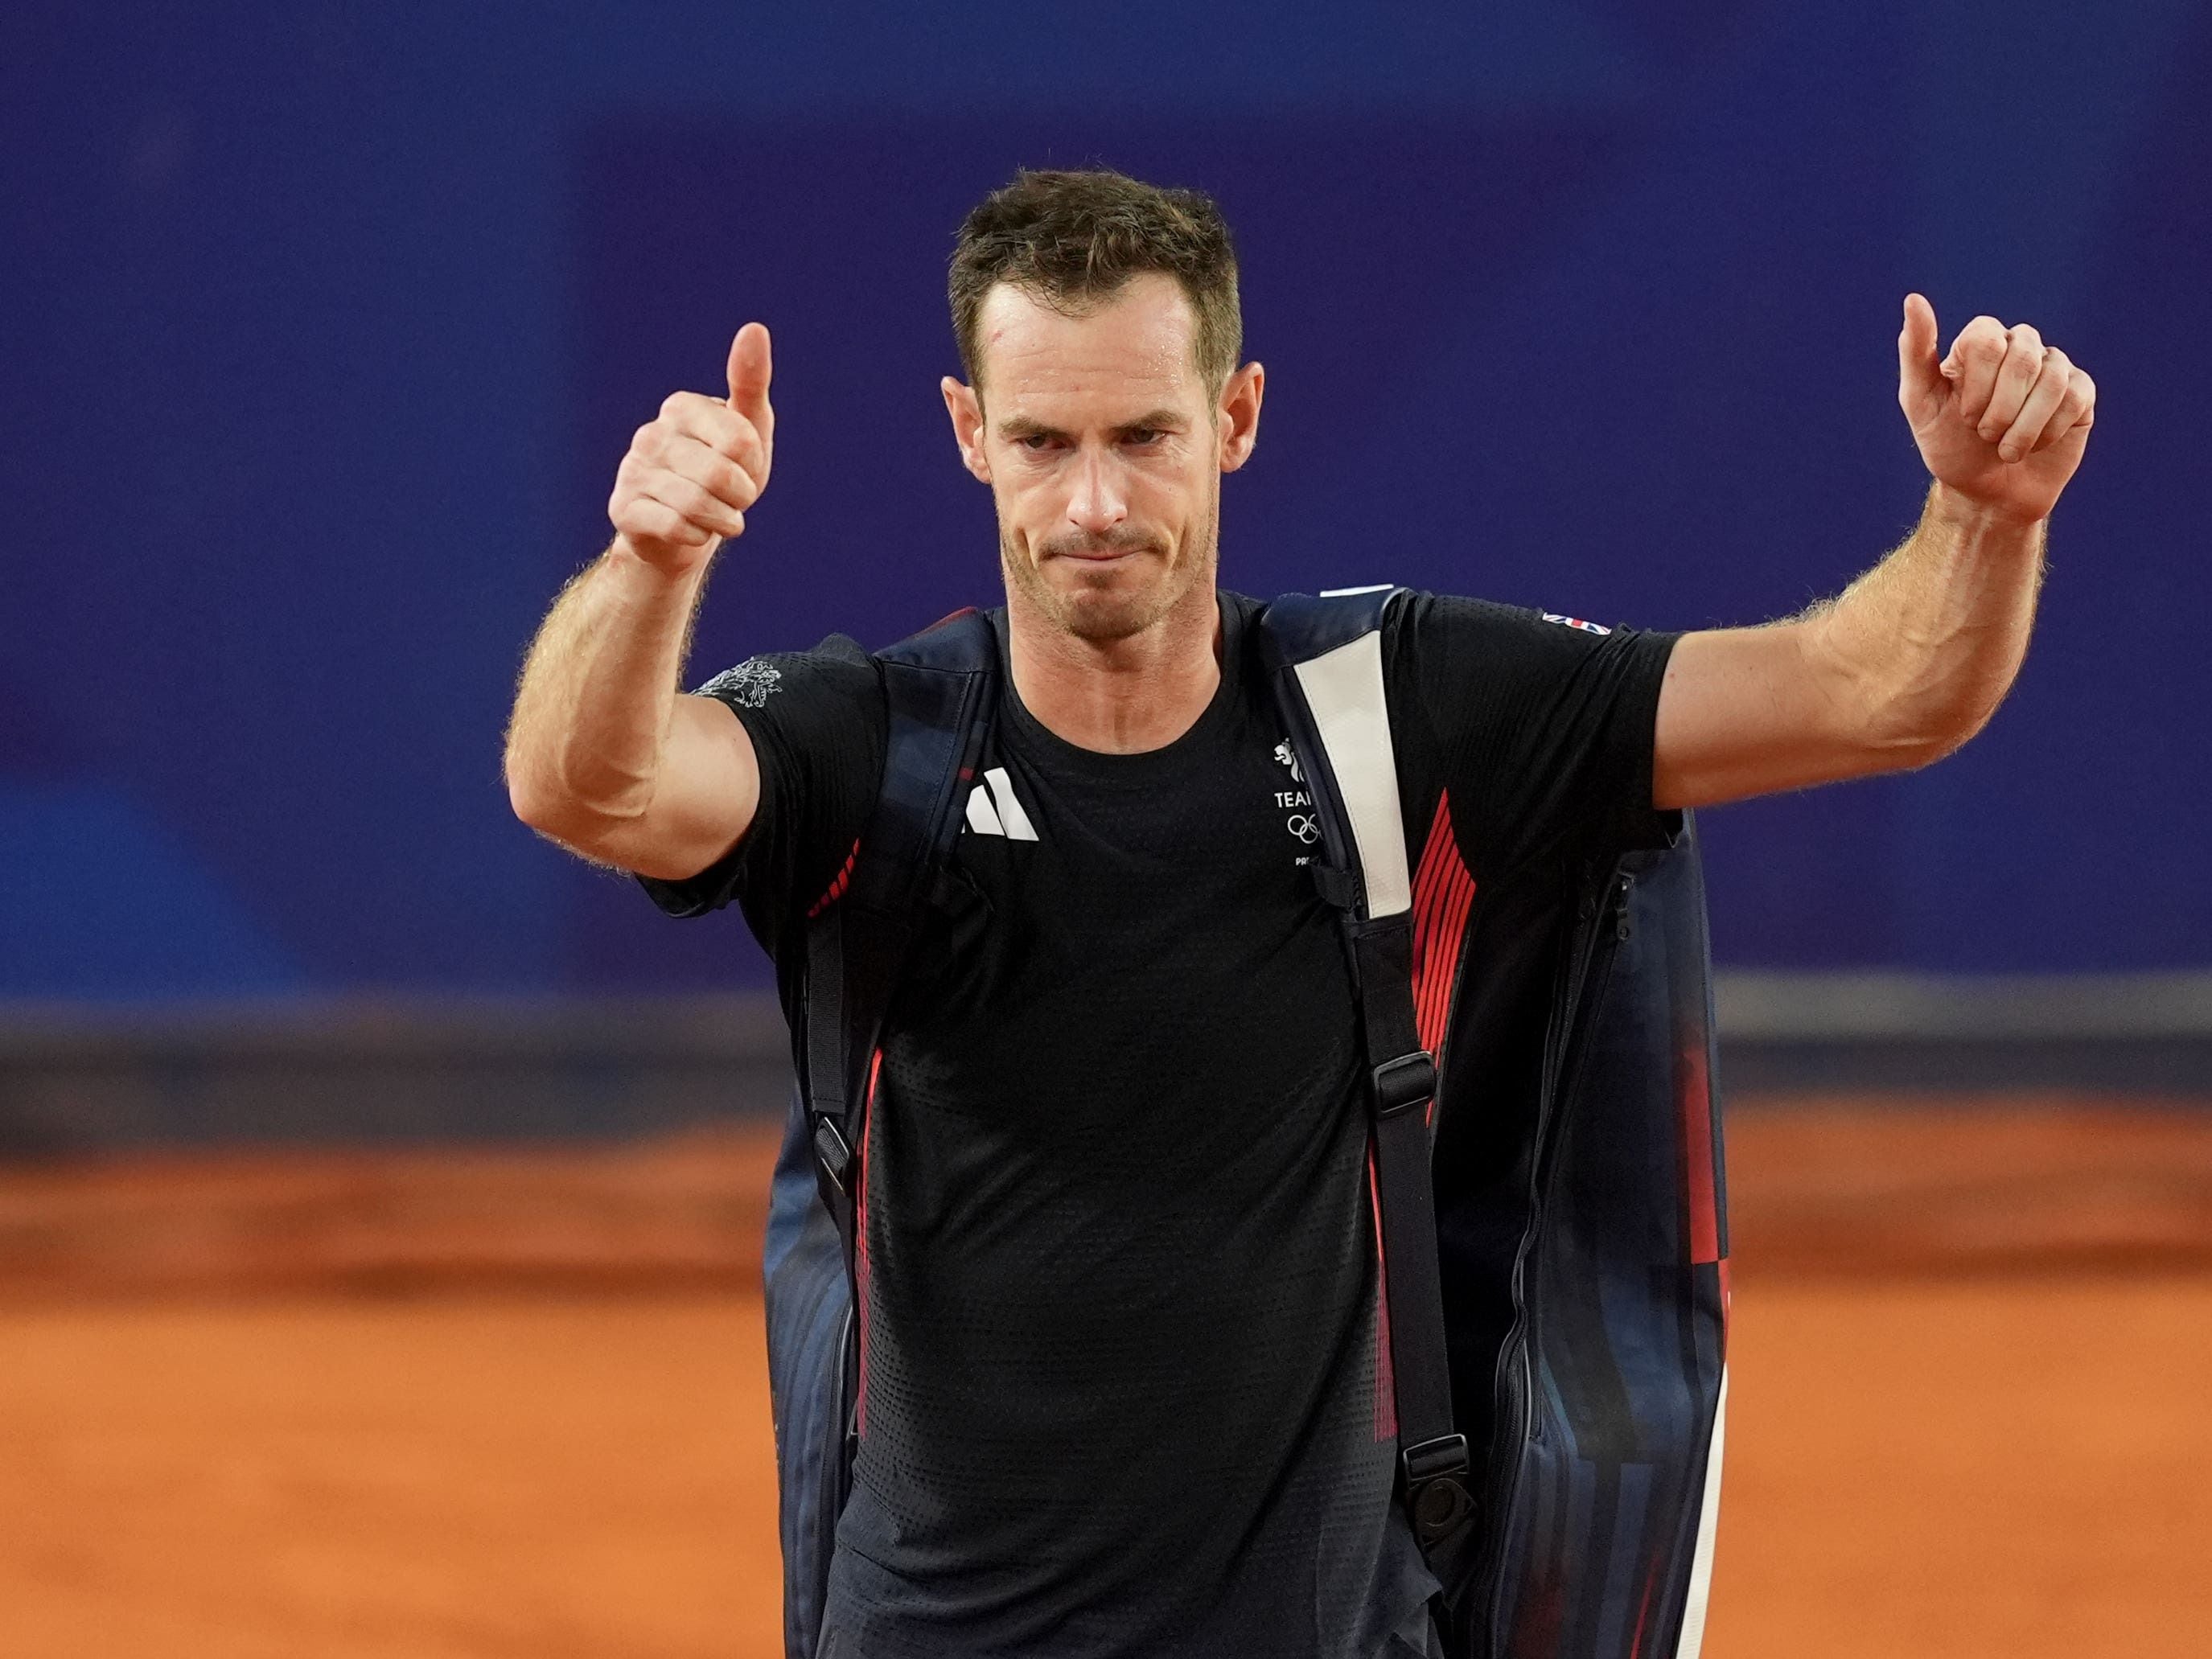 Andy Murray finally says goodbye to professional tennis with defeat in Paris